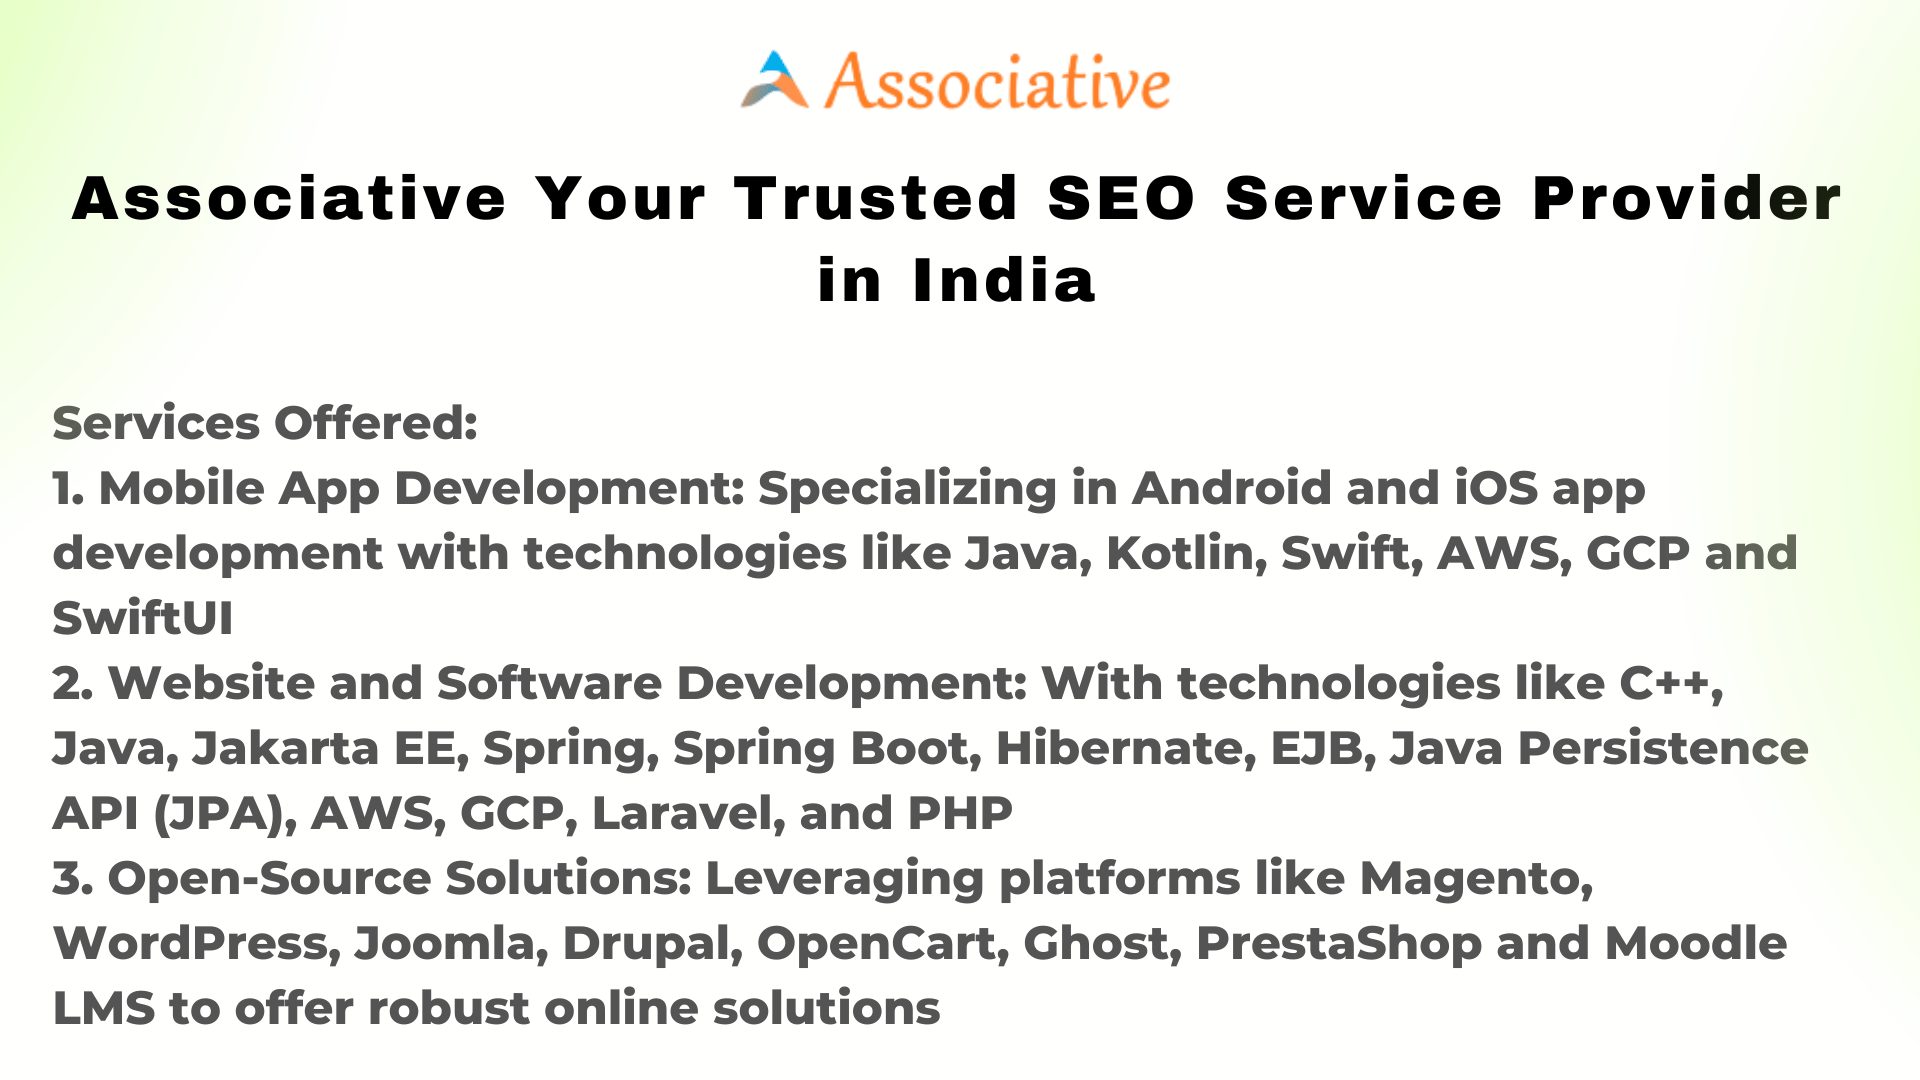 Associative Your Trusted SEO Service Provider in India